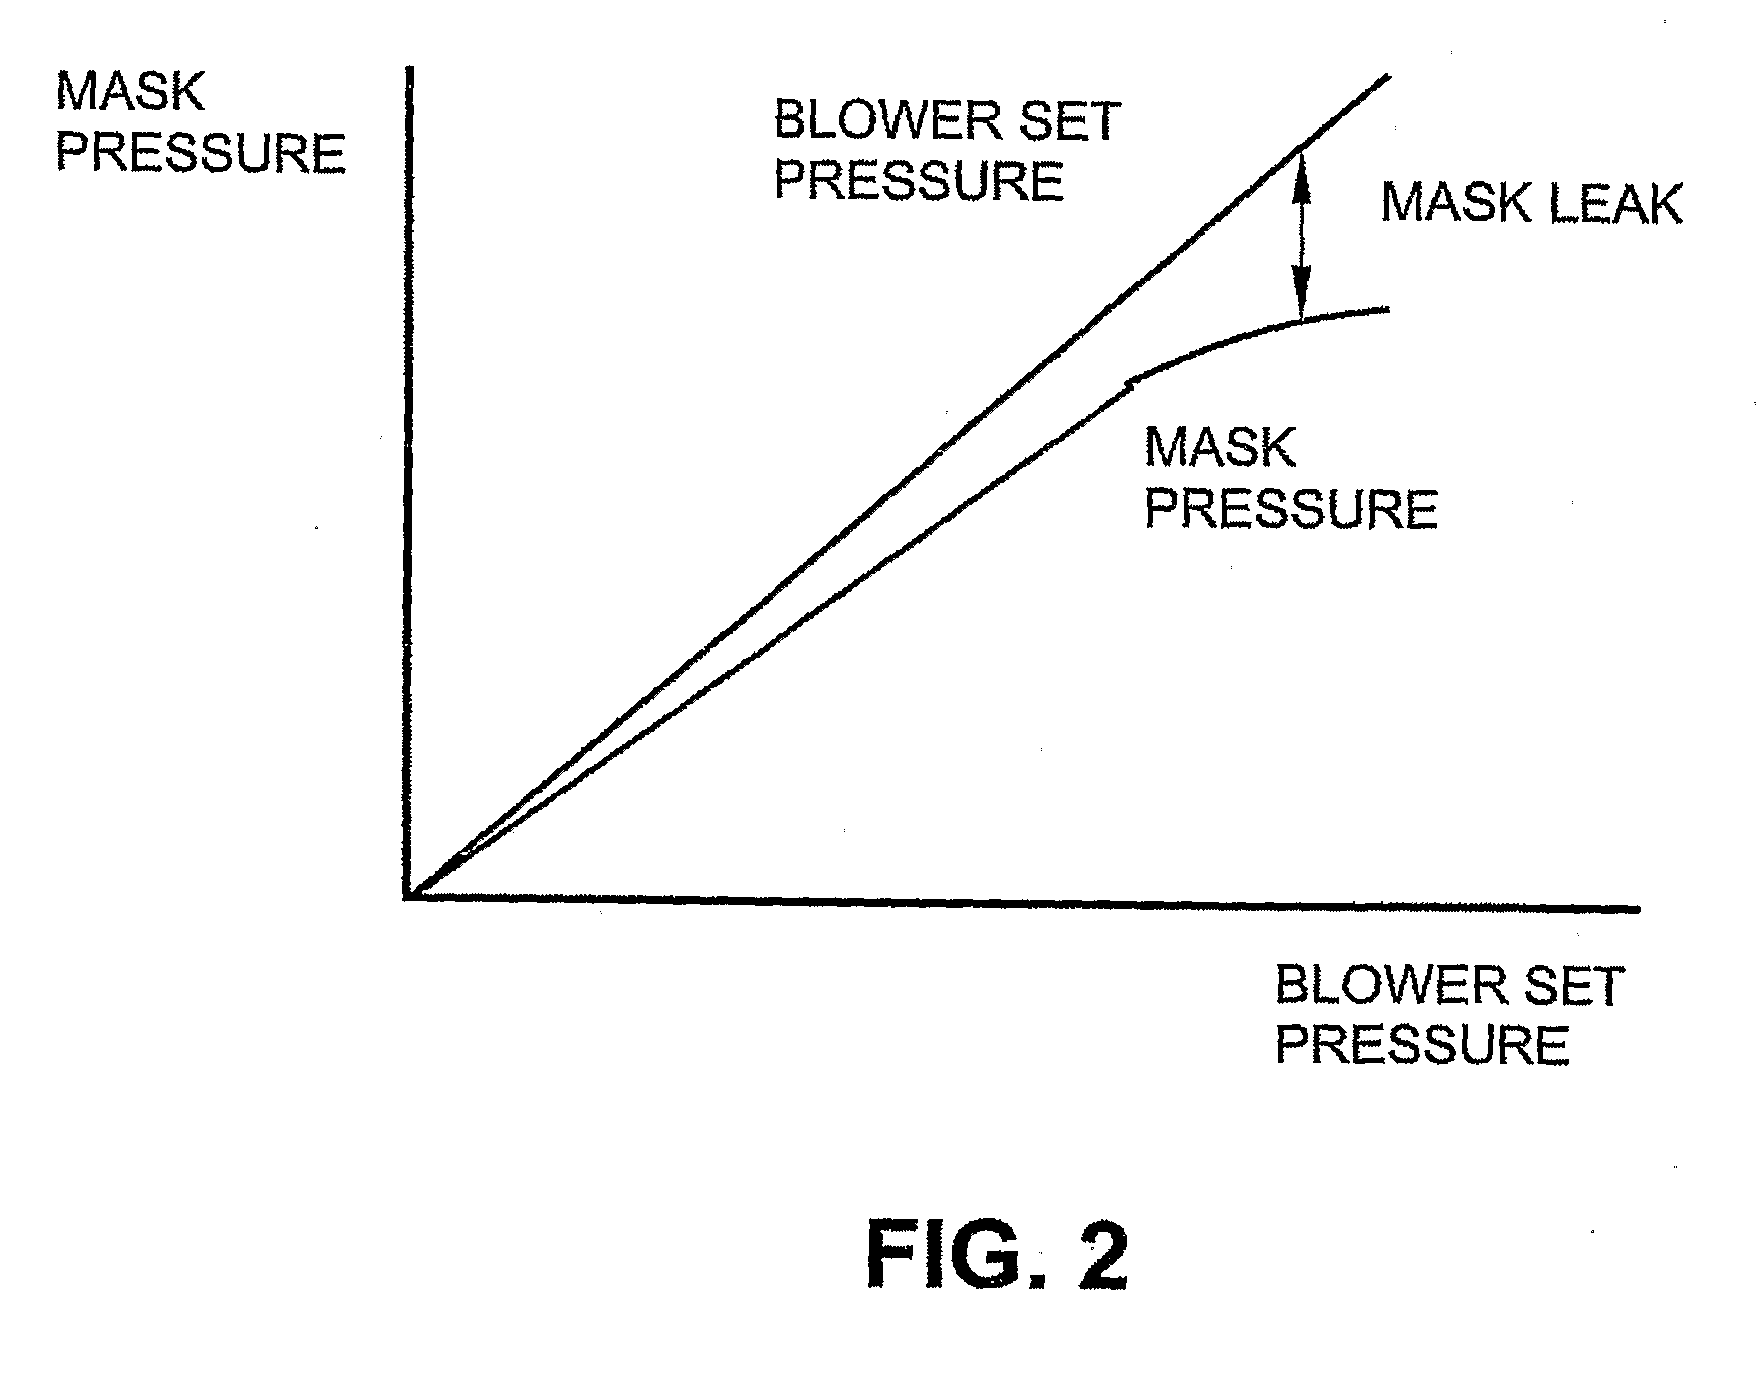 Methods and Apparatus for Controlling Mask Leak in CPAP Treatment